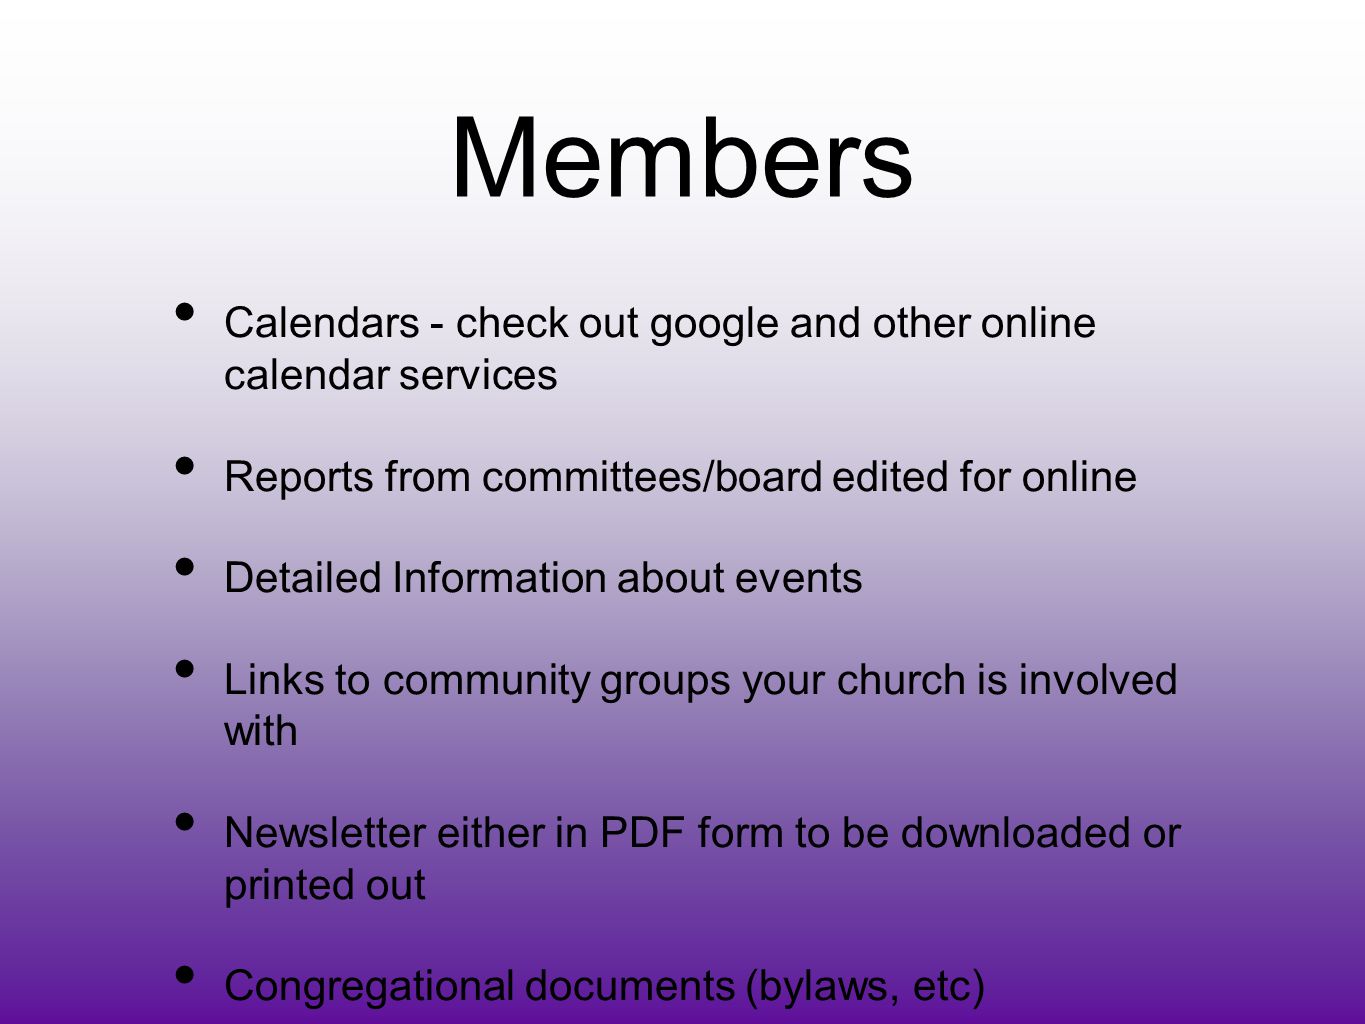 Members Calendars - check out google and other online calendar services Reports from committees/board edited for online Detailed Information about events Links to community groups your church is involved with Newsletter either in PDF form to be downloaded or printed out Congregational documents (bylaws, etc)